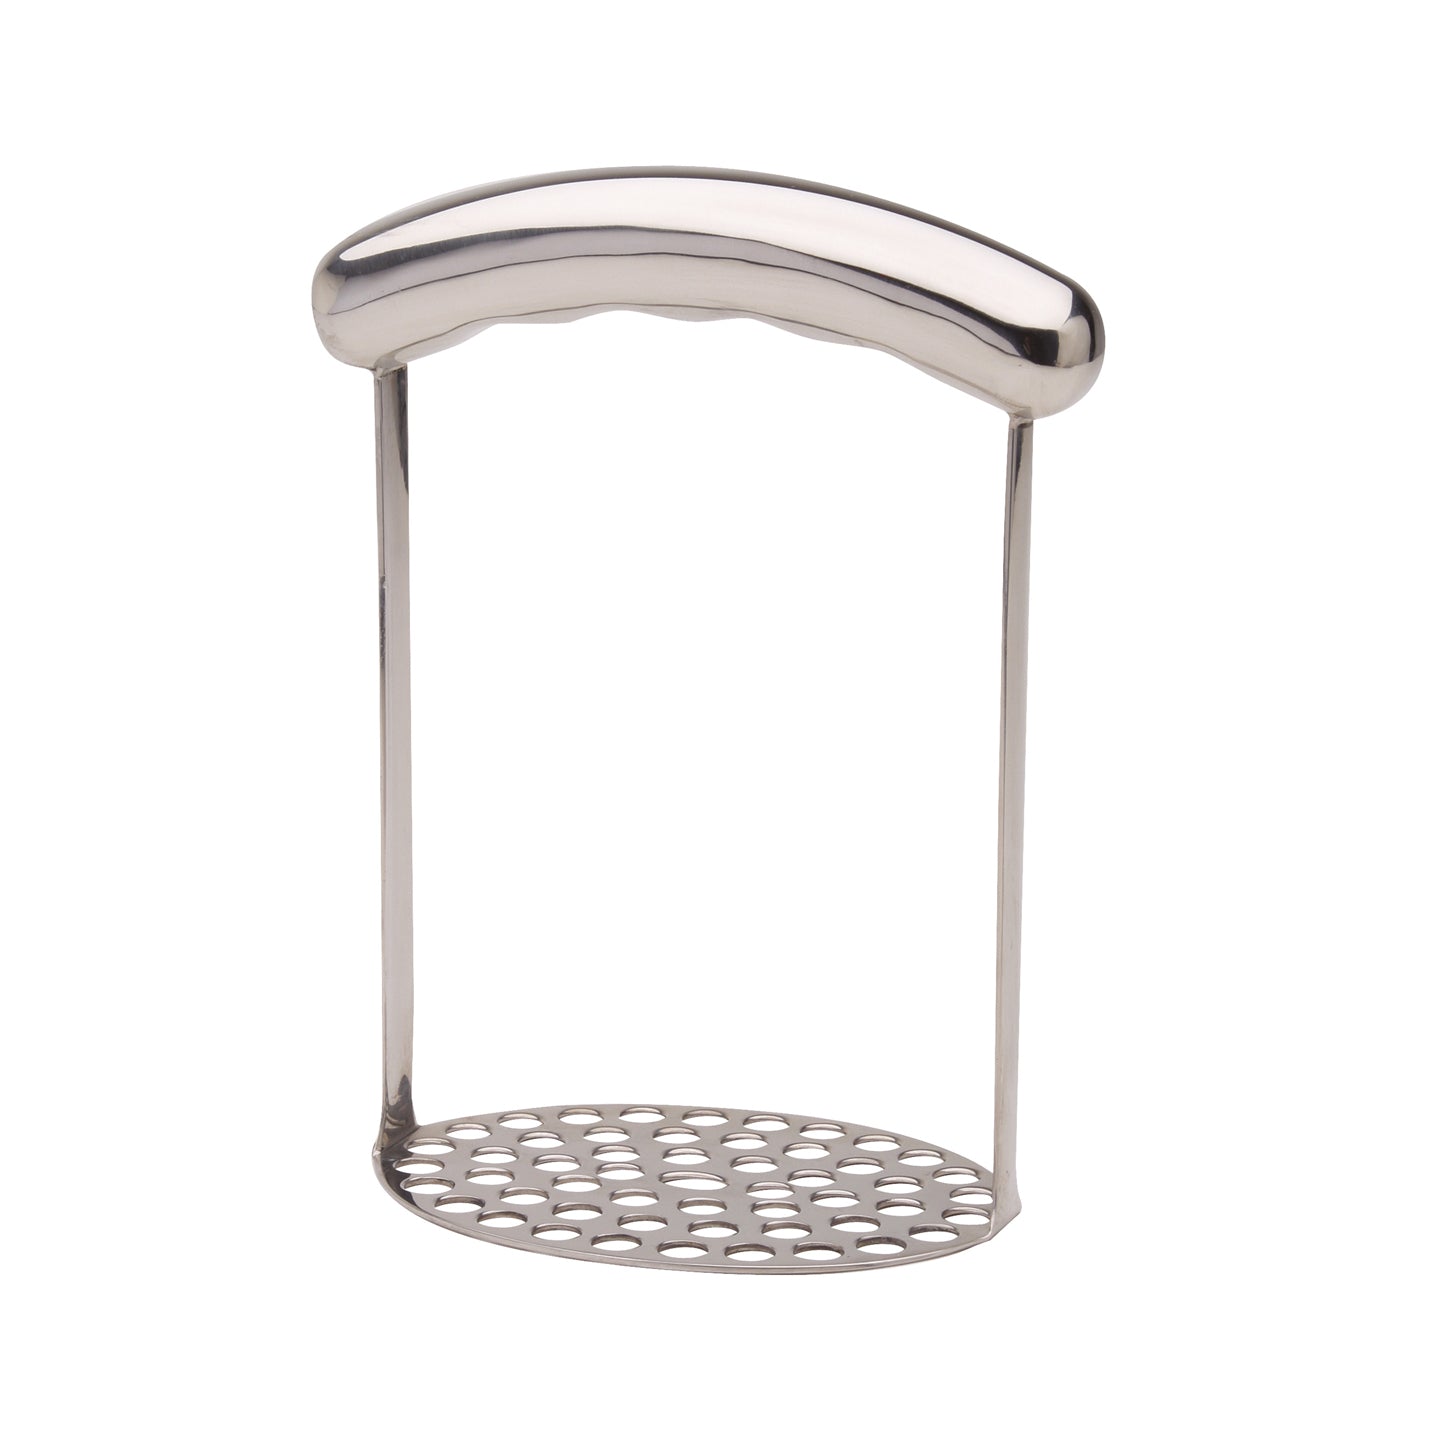 Stainless Steel Oval Shaped Potato Masher